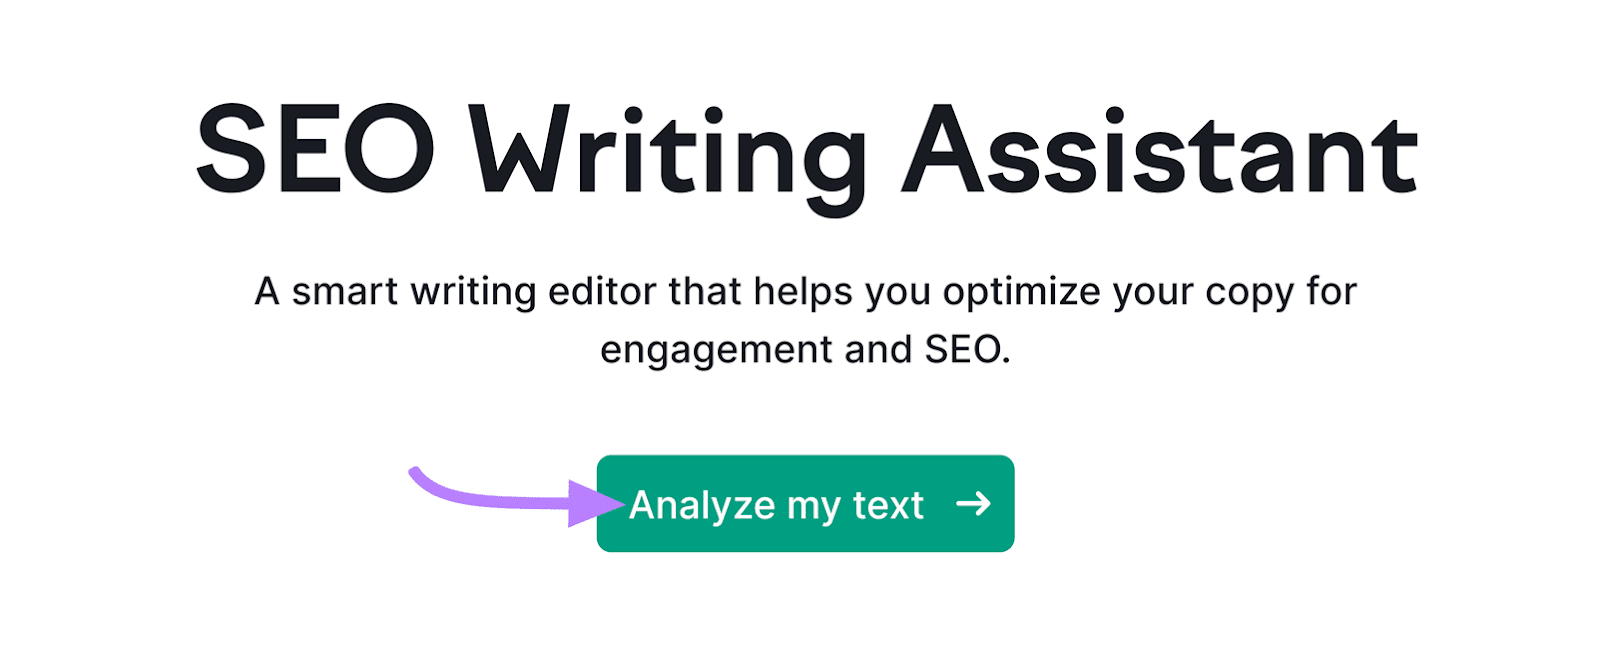 SEO Writing Assistant tool